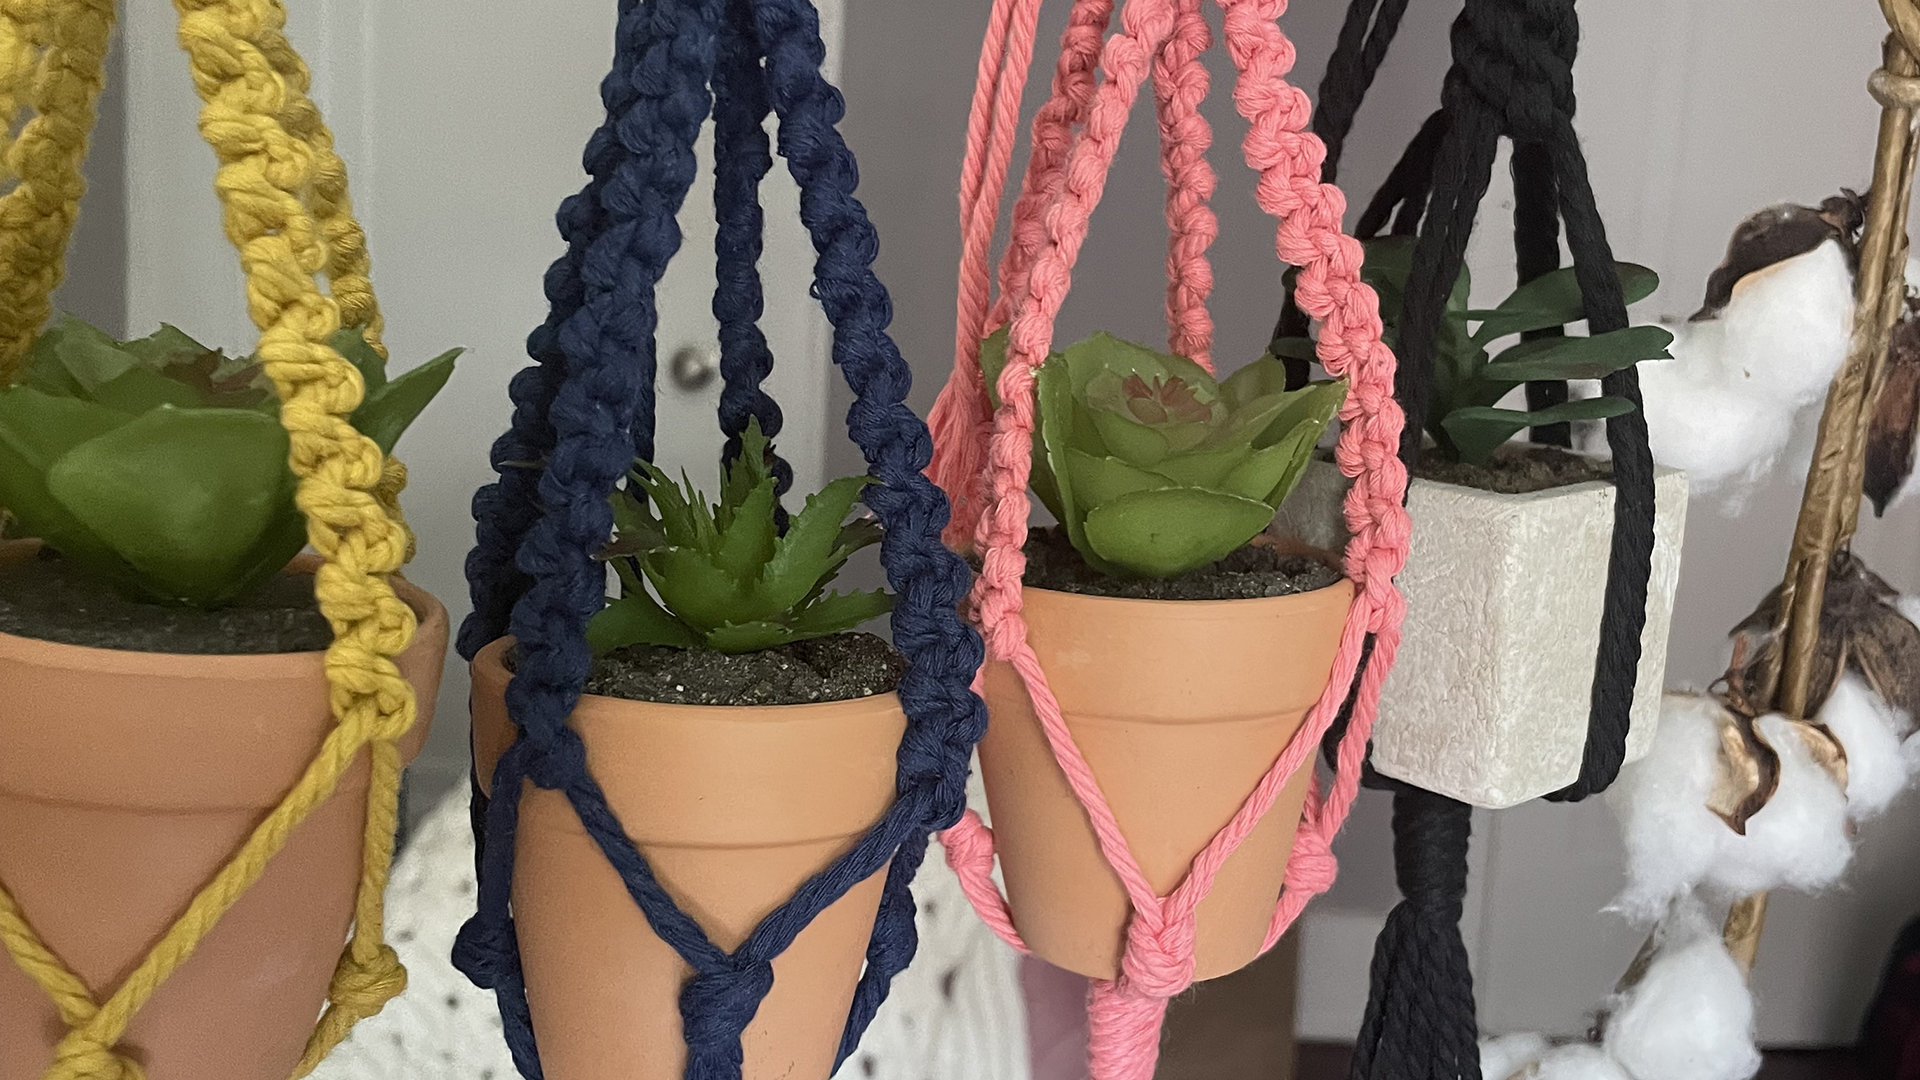 macrame and margaritas class at the everson